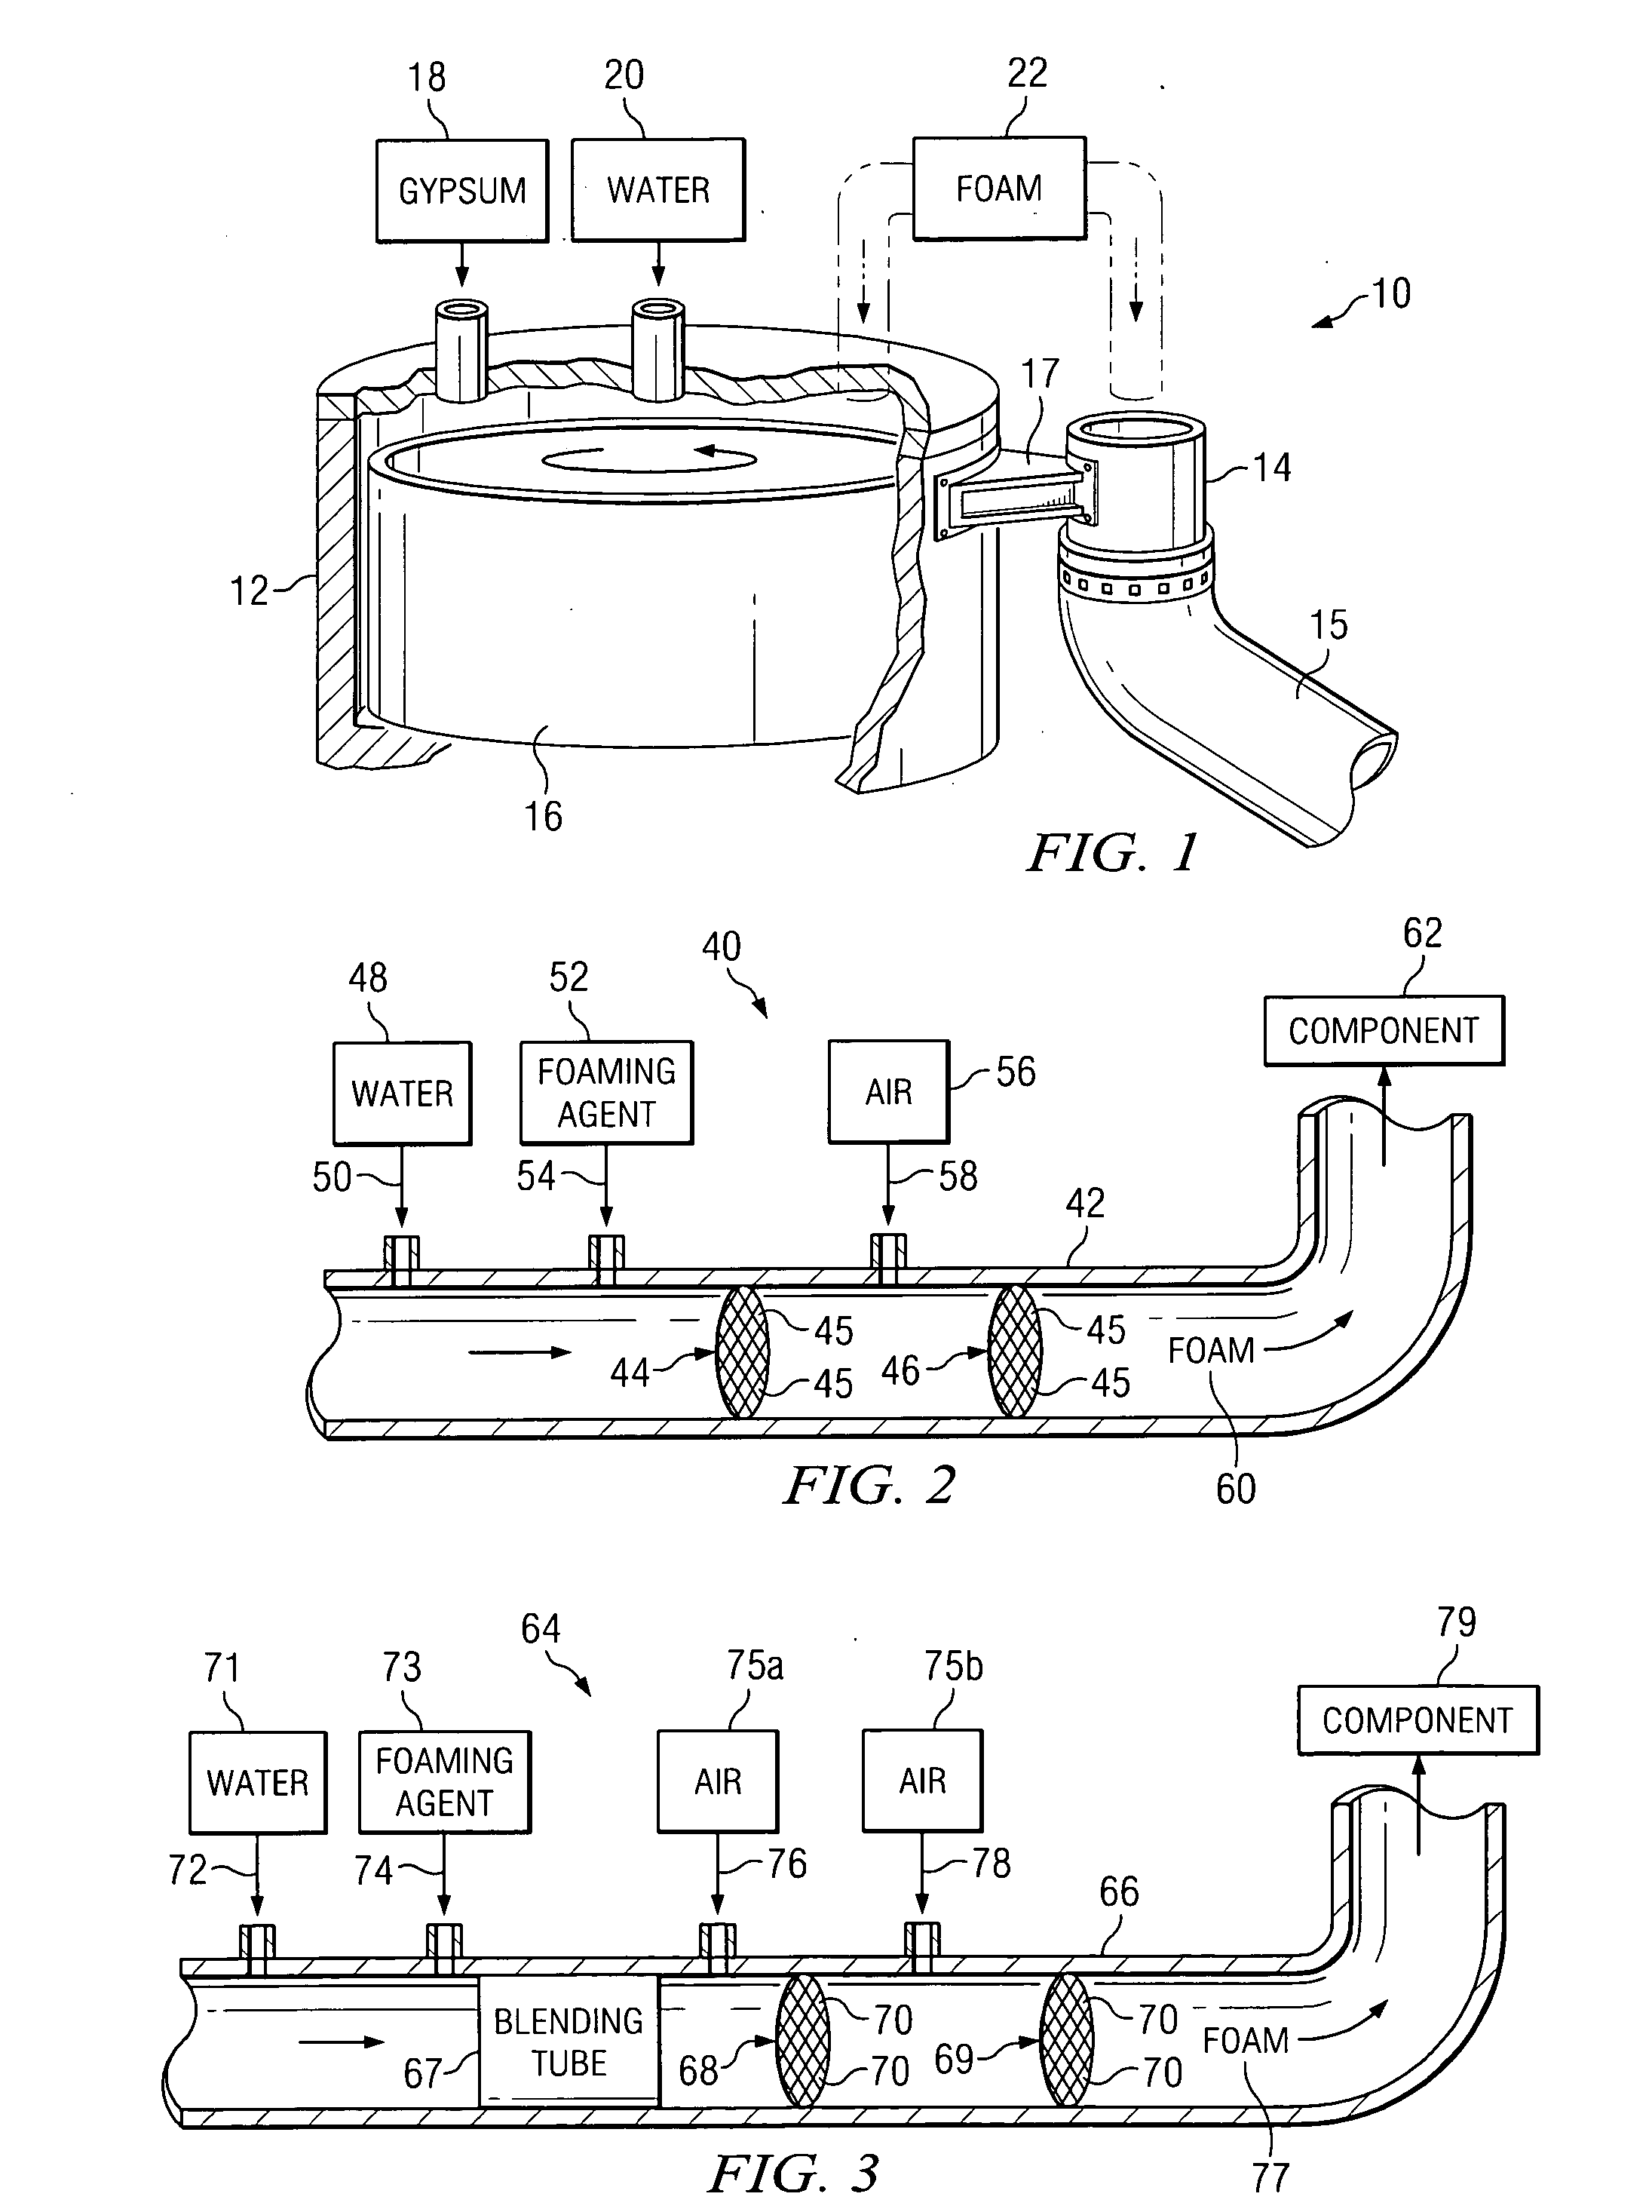 Method and system for generating foam for the manufacture of gypsum products